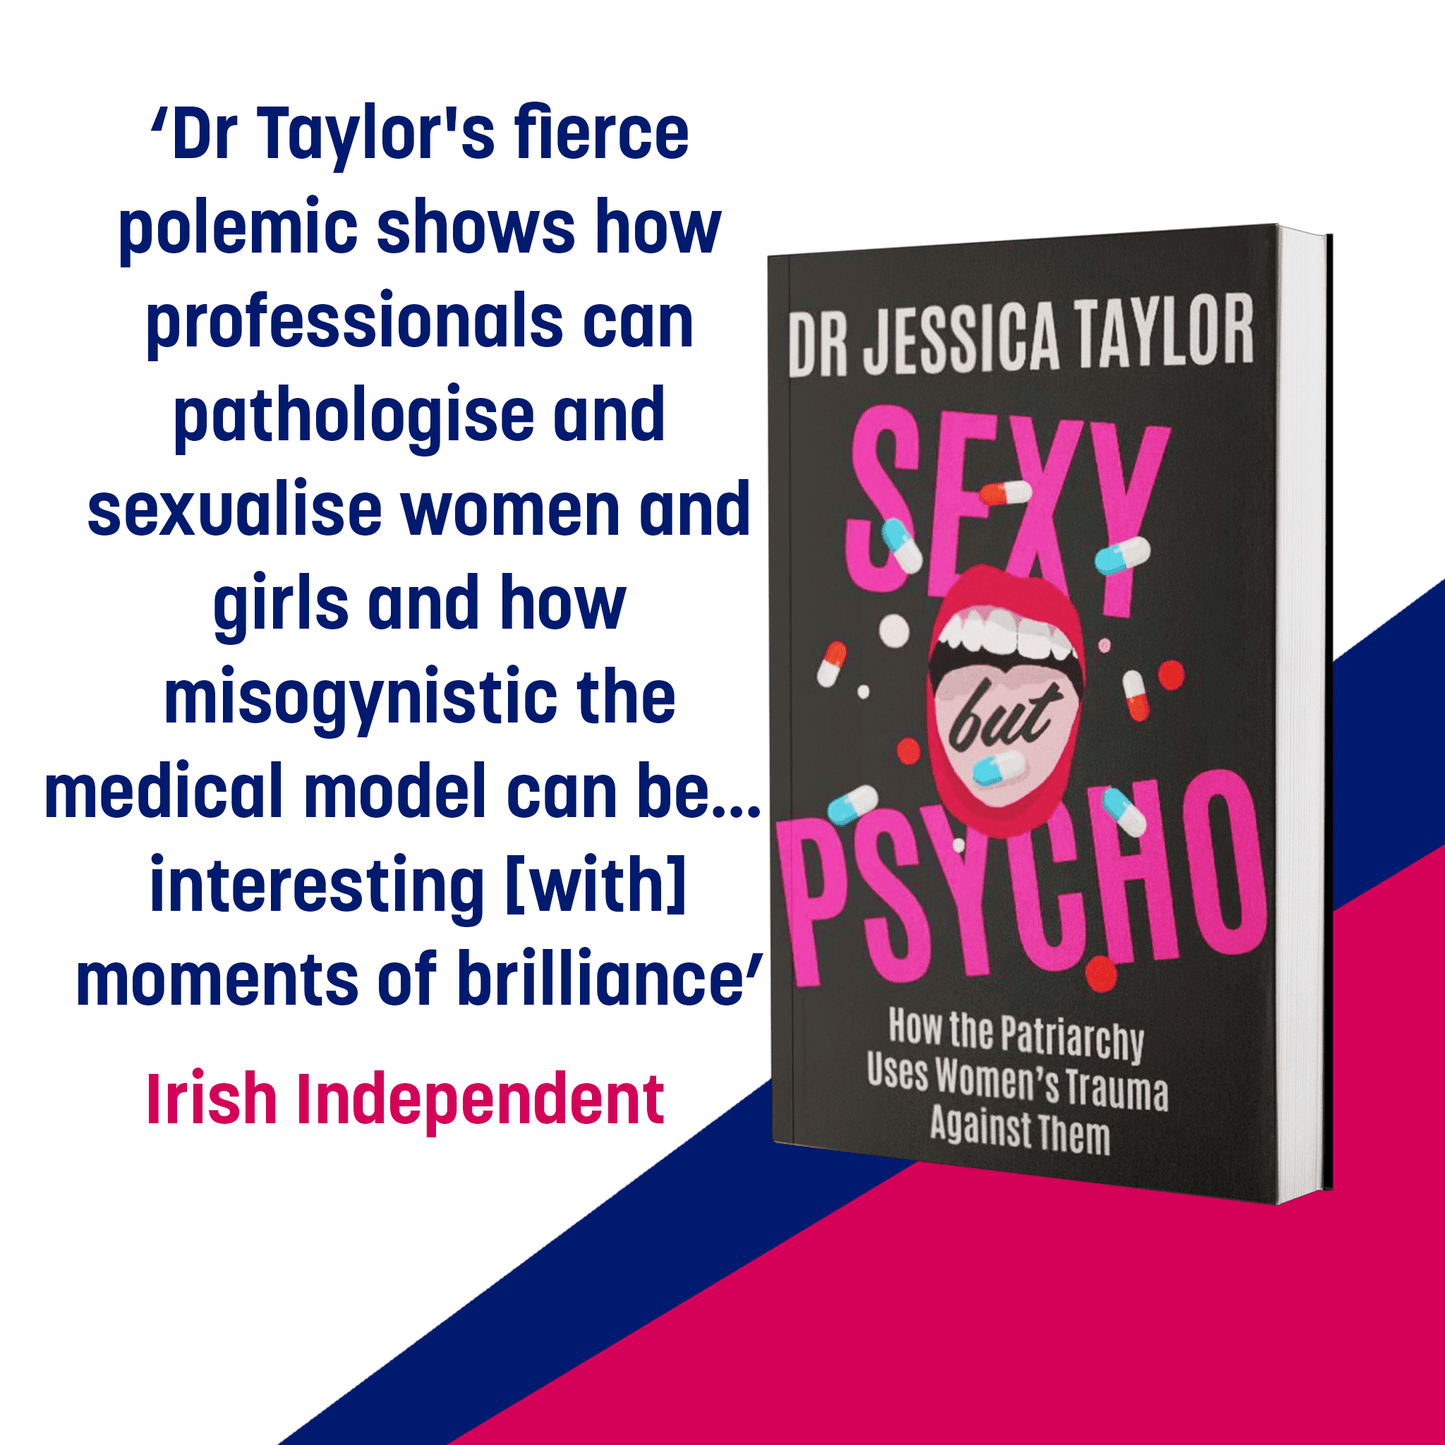 SIGNED FIRST EDITION Hardback ‘Sexy But Psycho: How the Patriarchy Uses Women's Trauma Against Them'